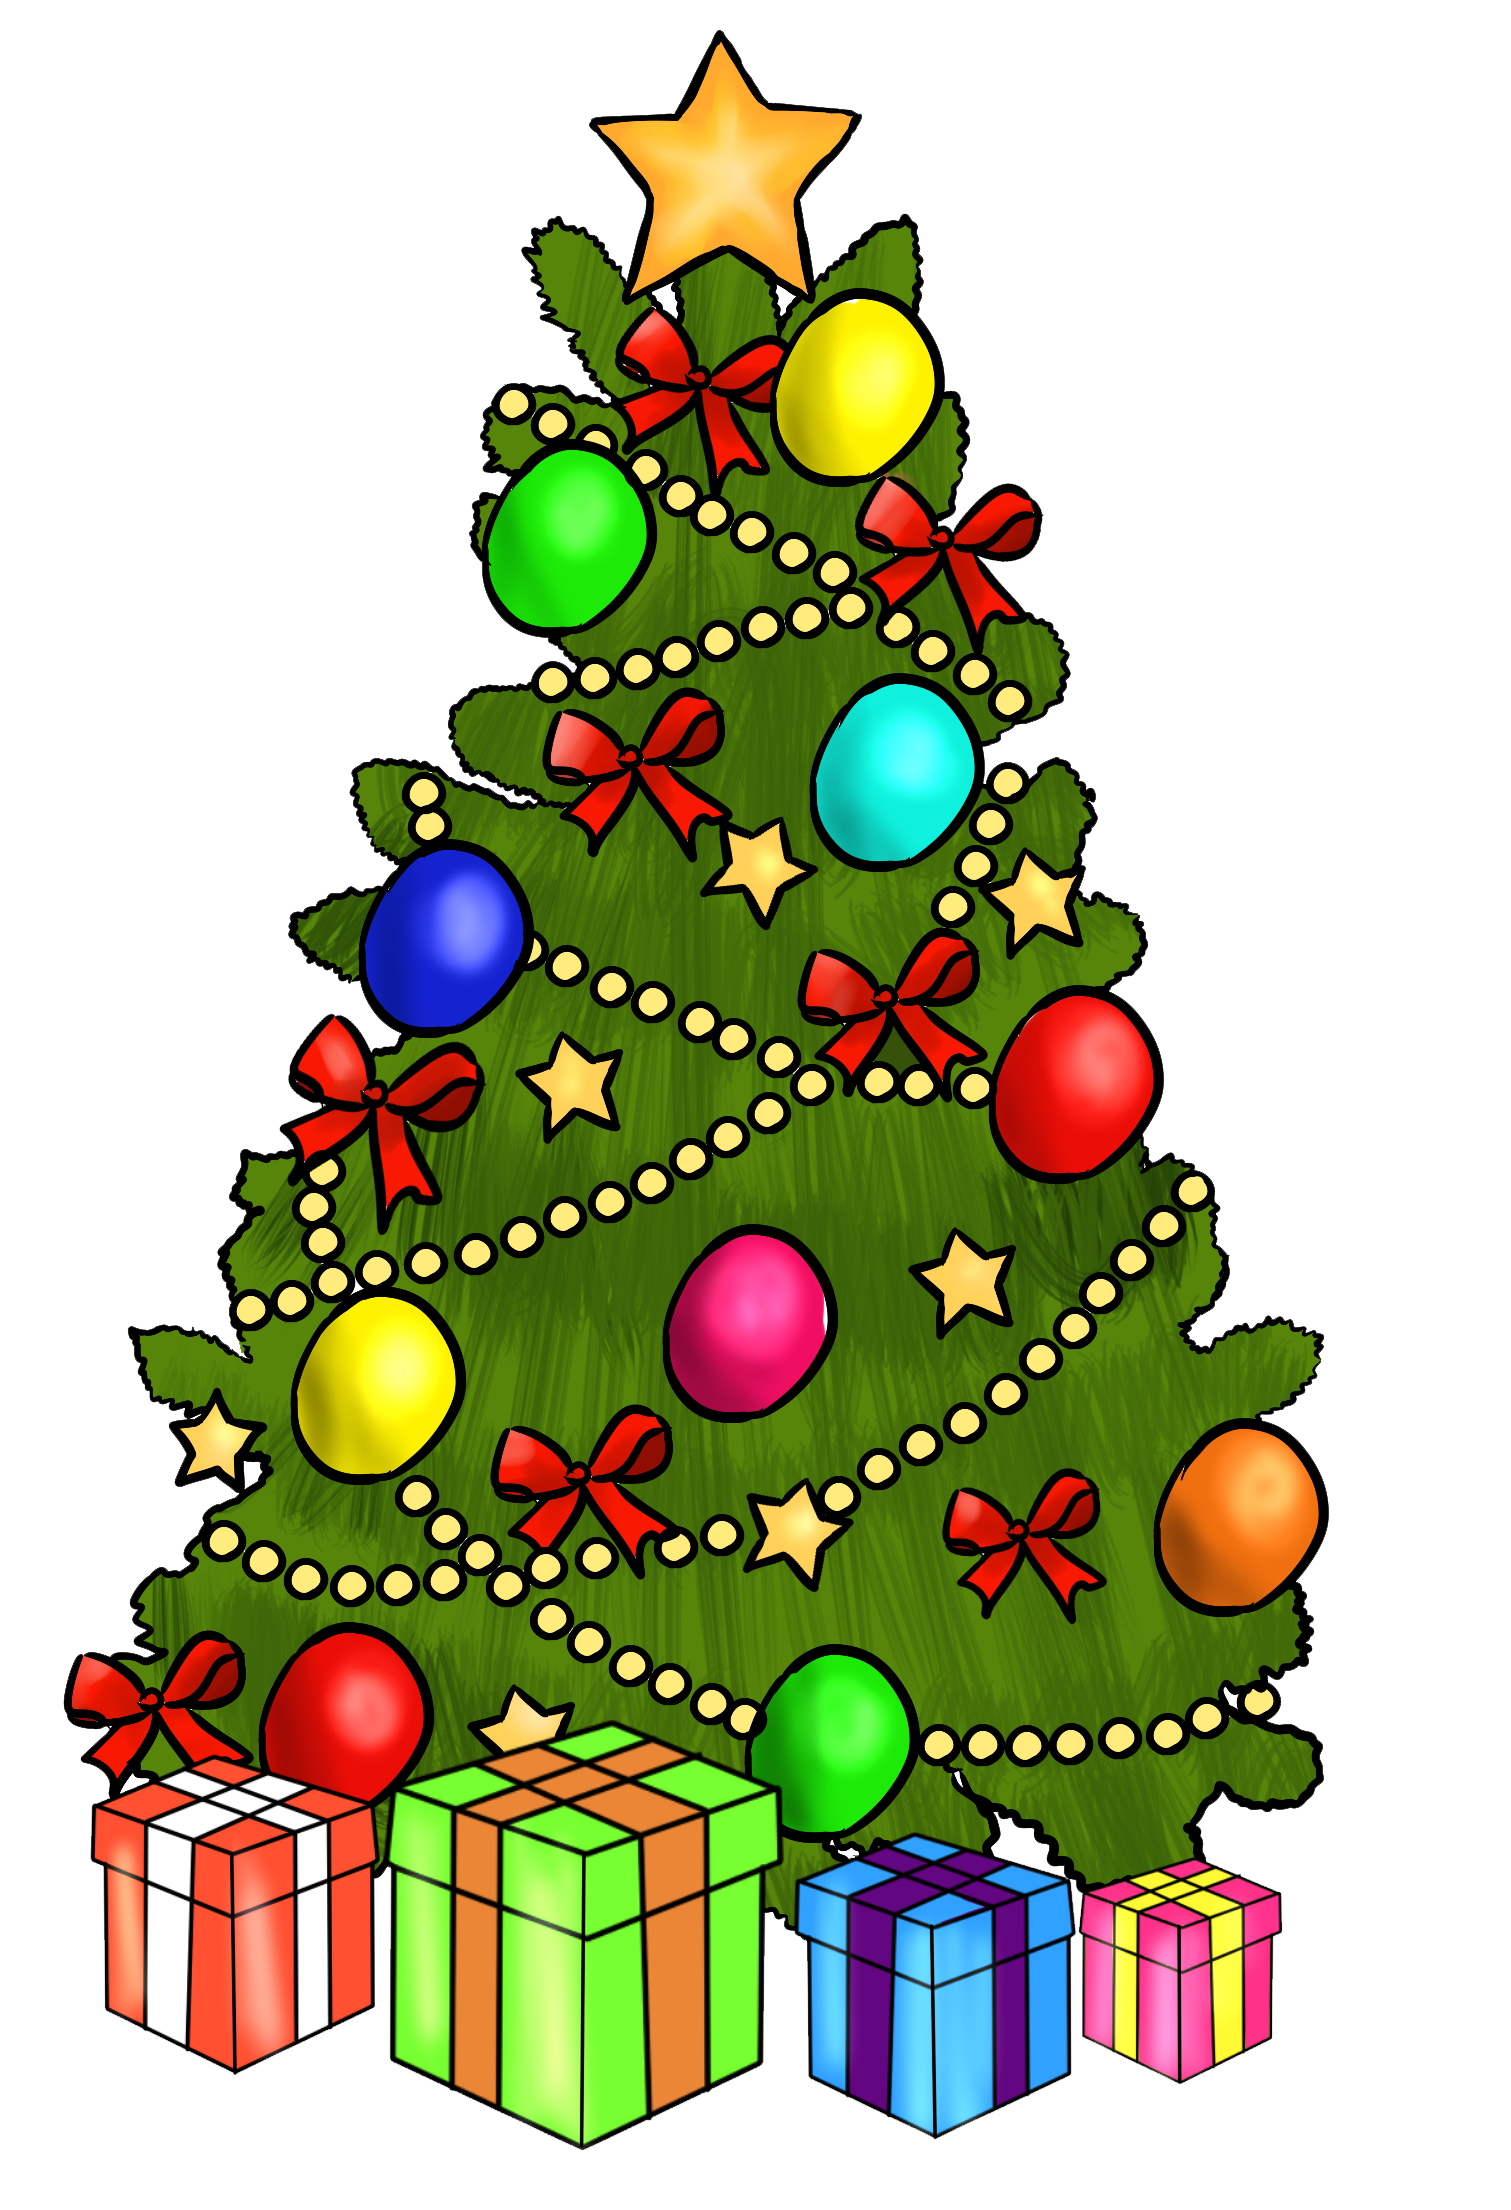 Clipart bow christmas tree decoration. This cute wreath clip